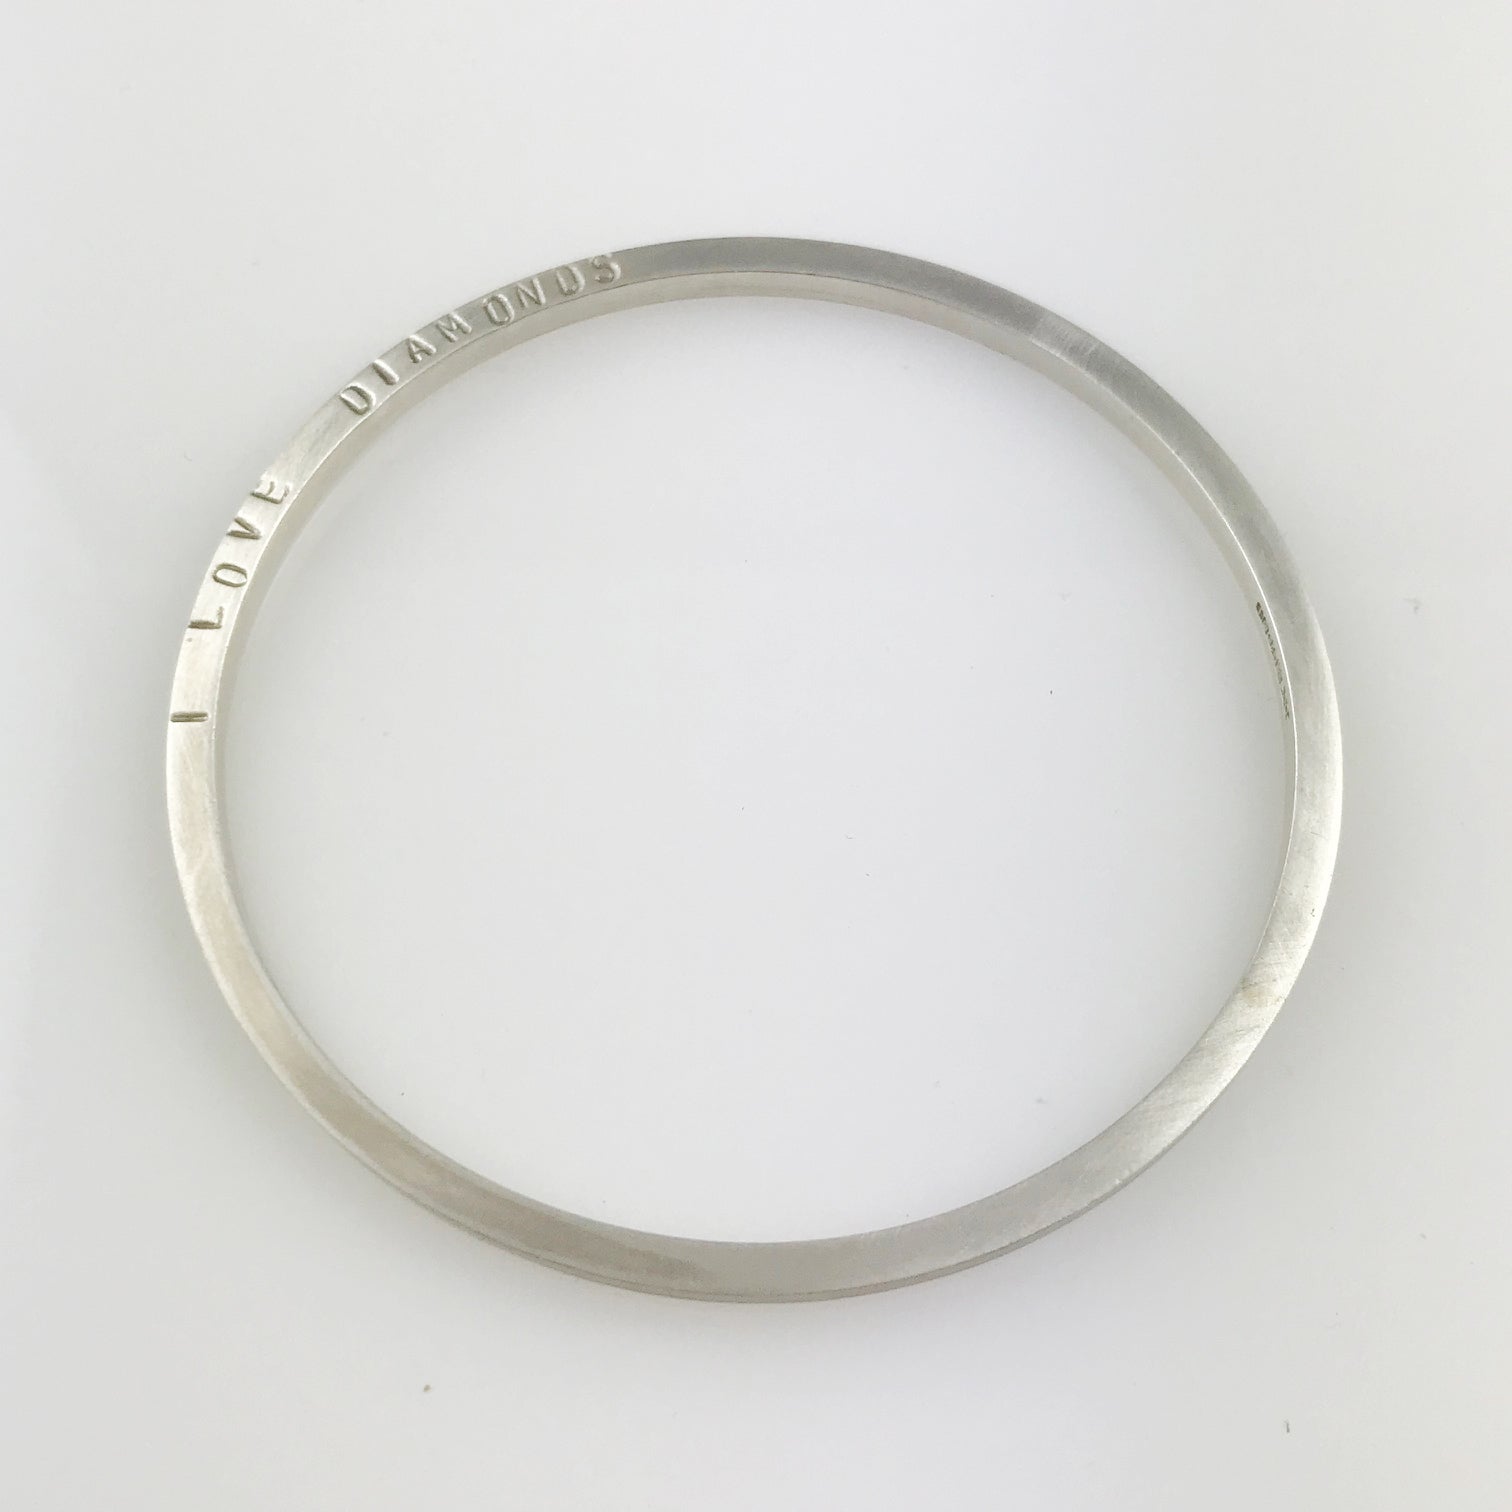 Silver round bangle with the words 'I LOVE DIAMONDS'